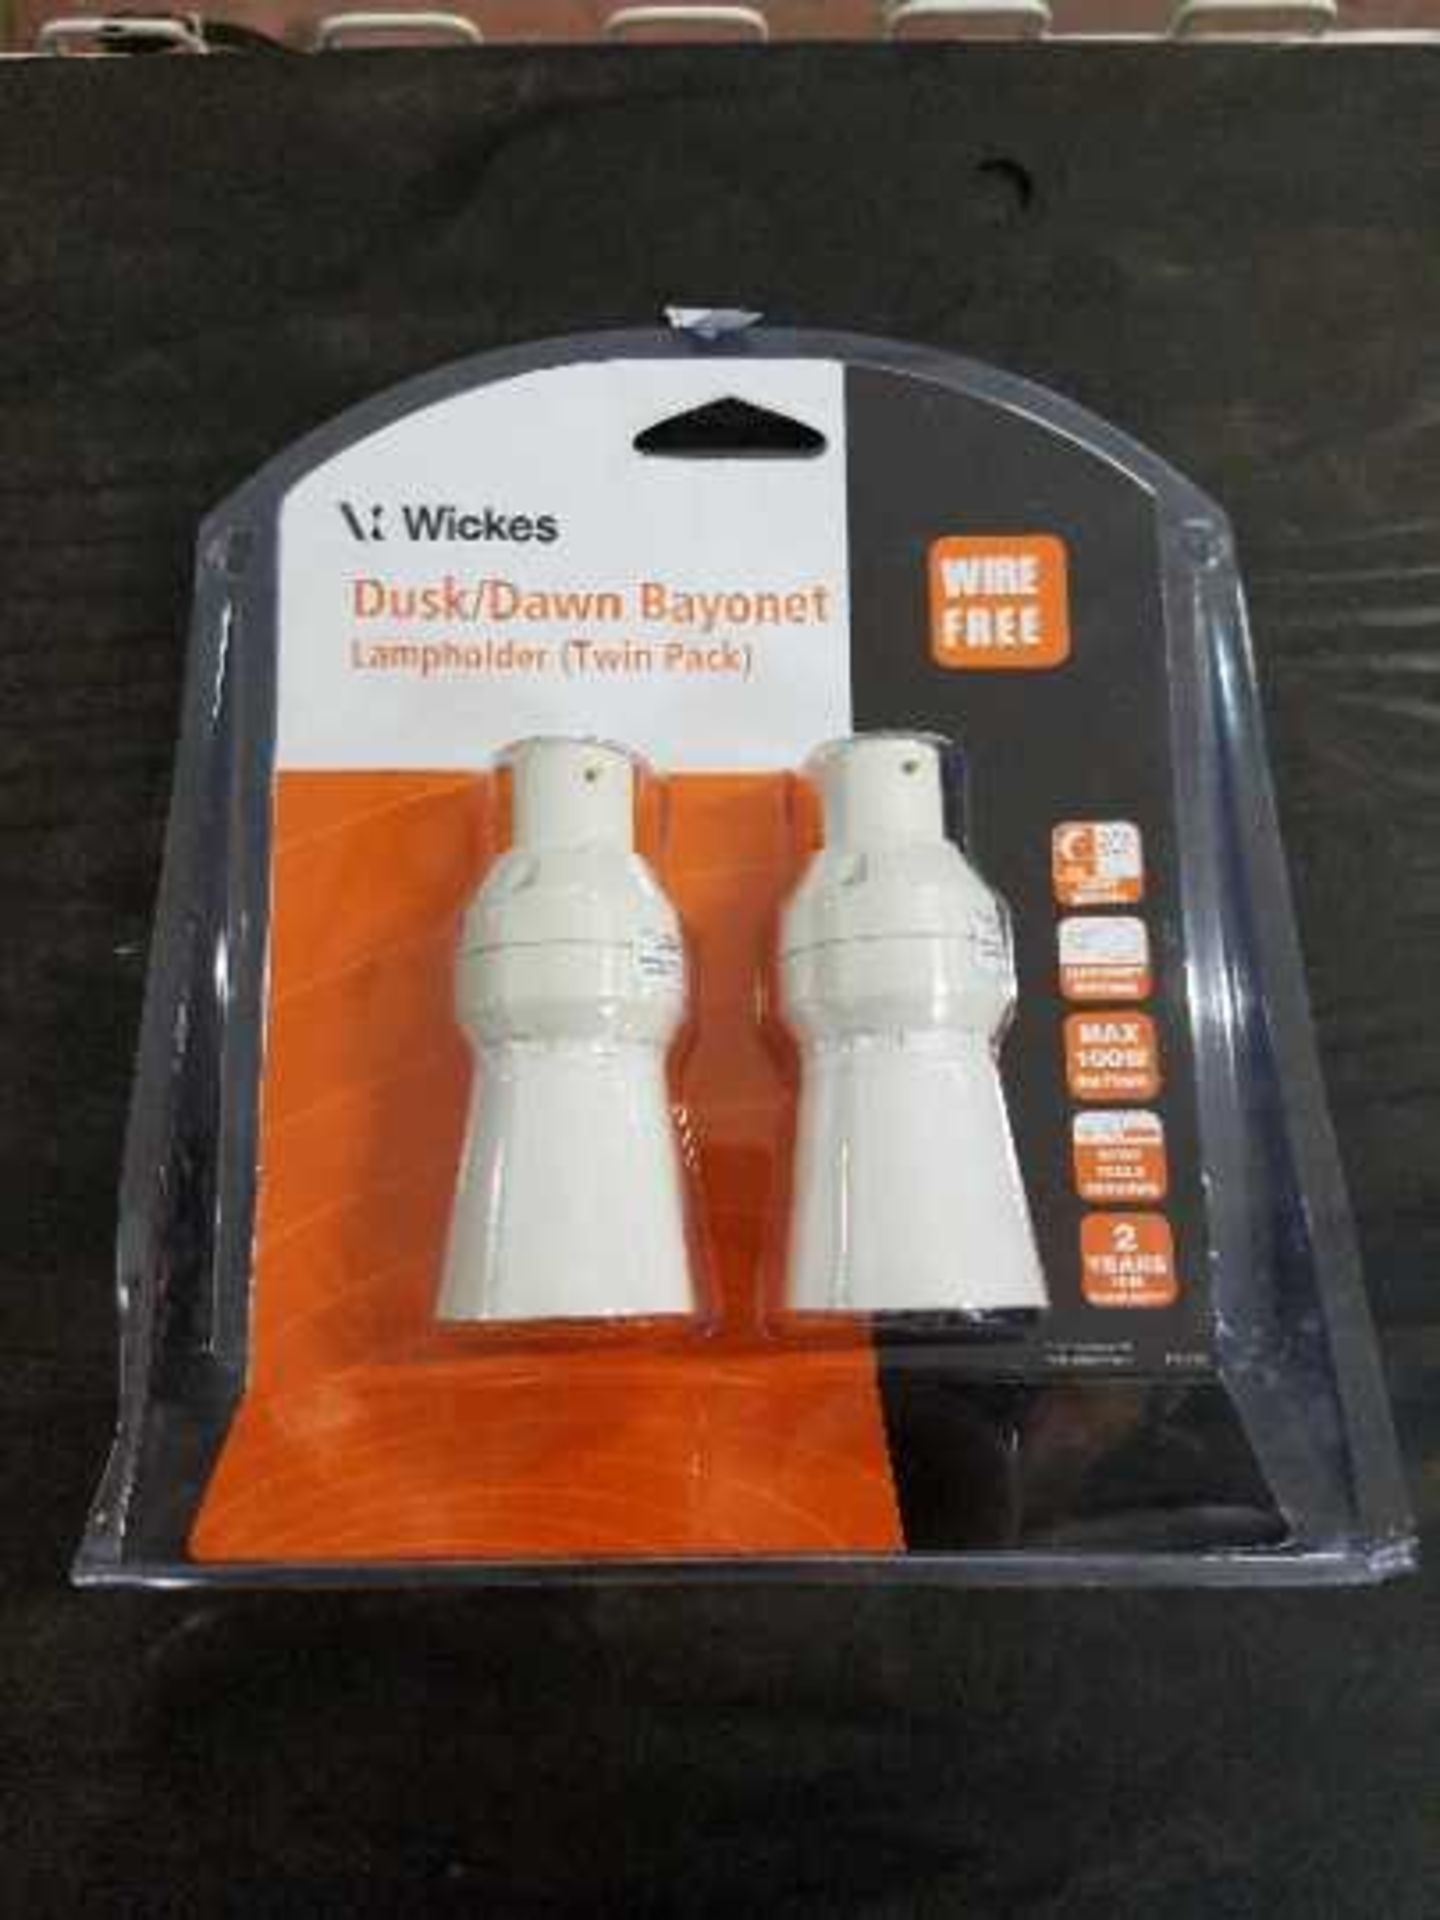 Wickes Dusk/Dawn lampholder twin pack, new and still blister packed, ideal winter security measure